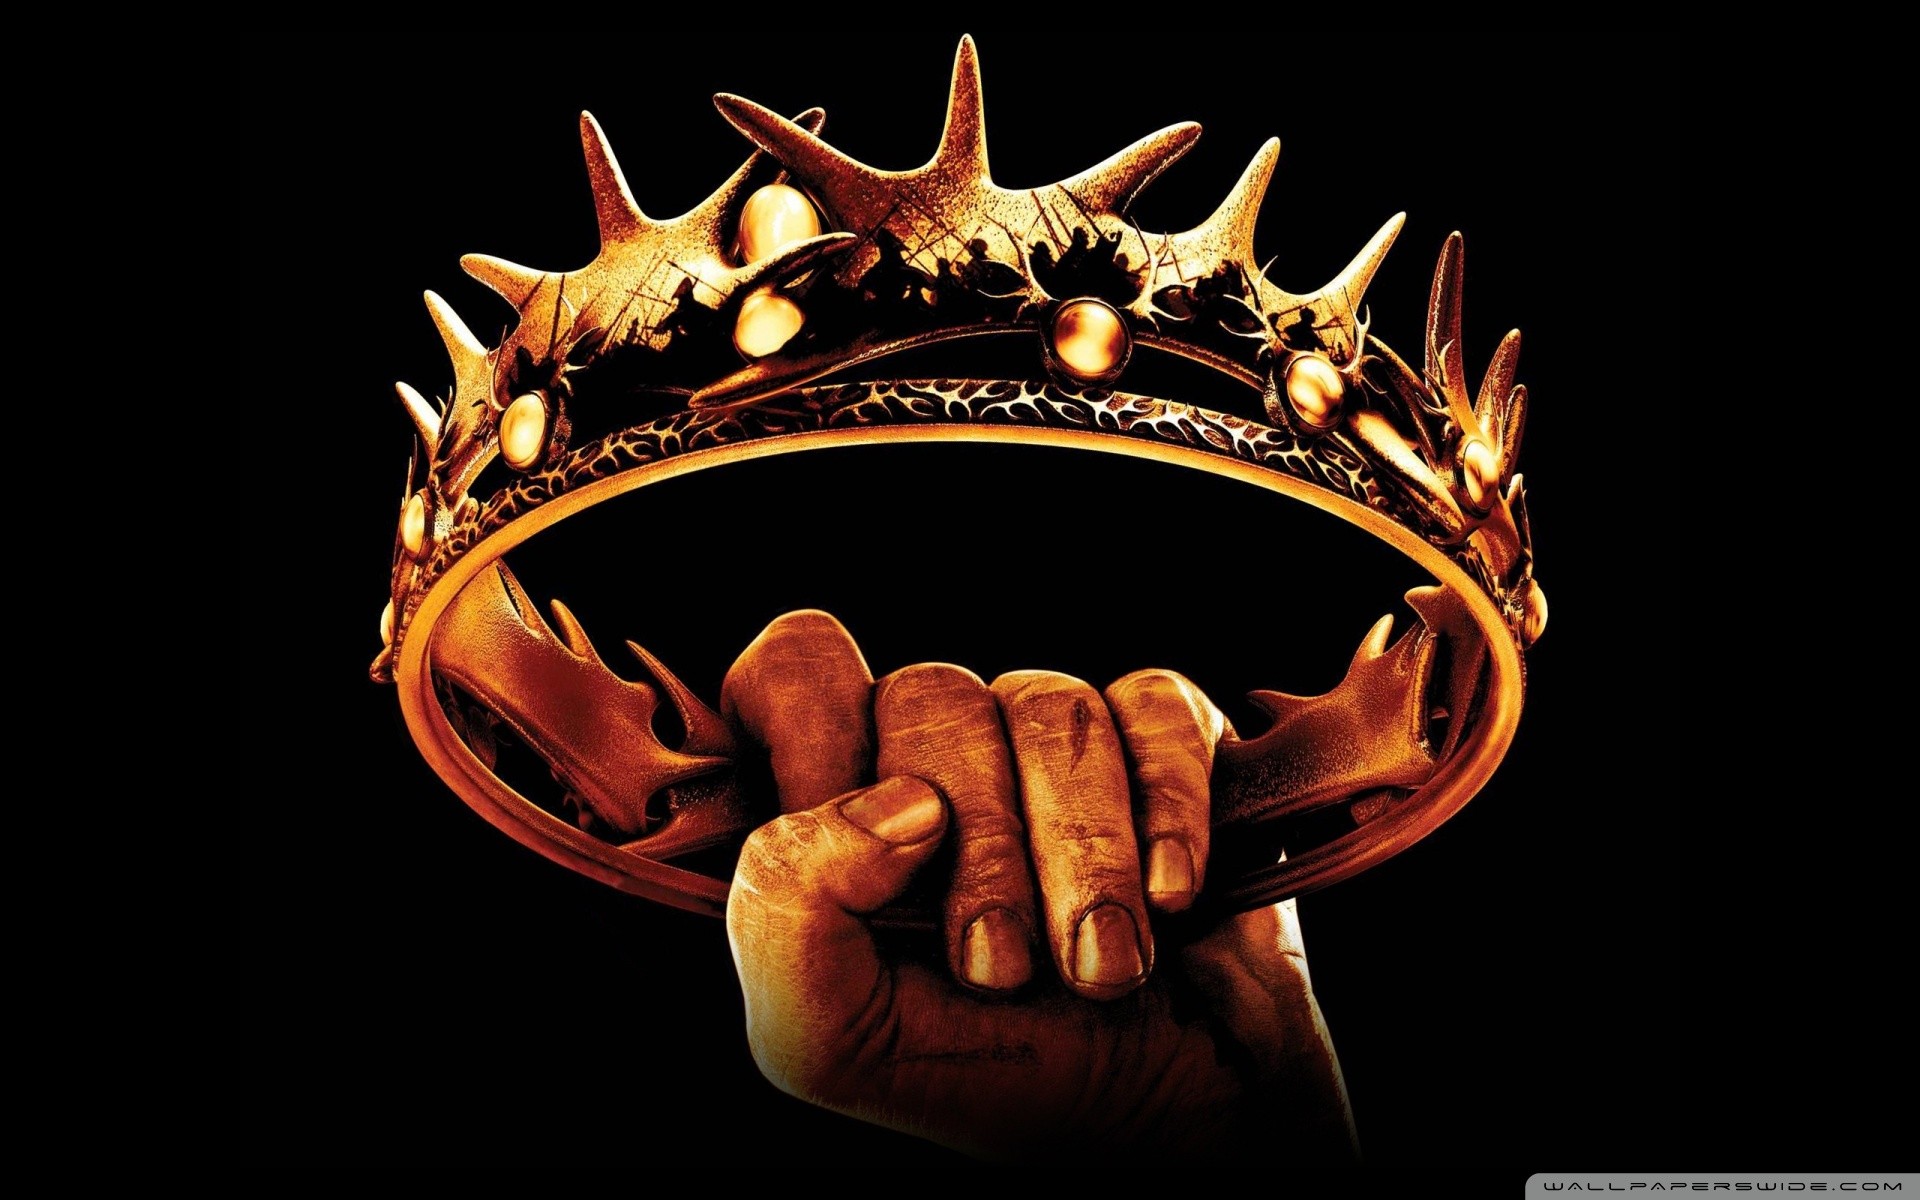 General 1920x1200 Game of Thrones crown TV series hands black background simple background